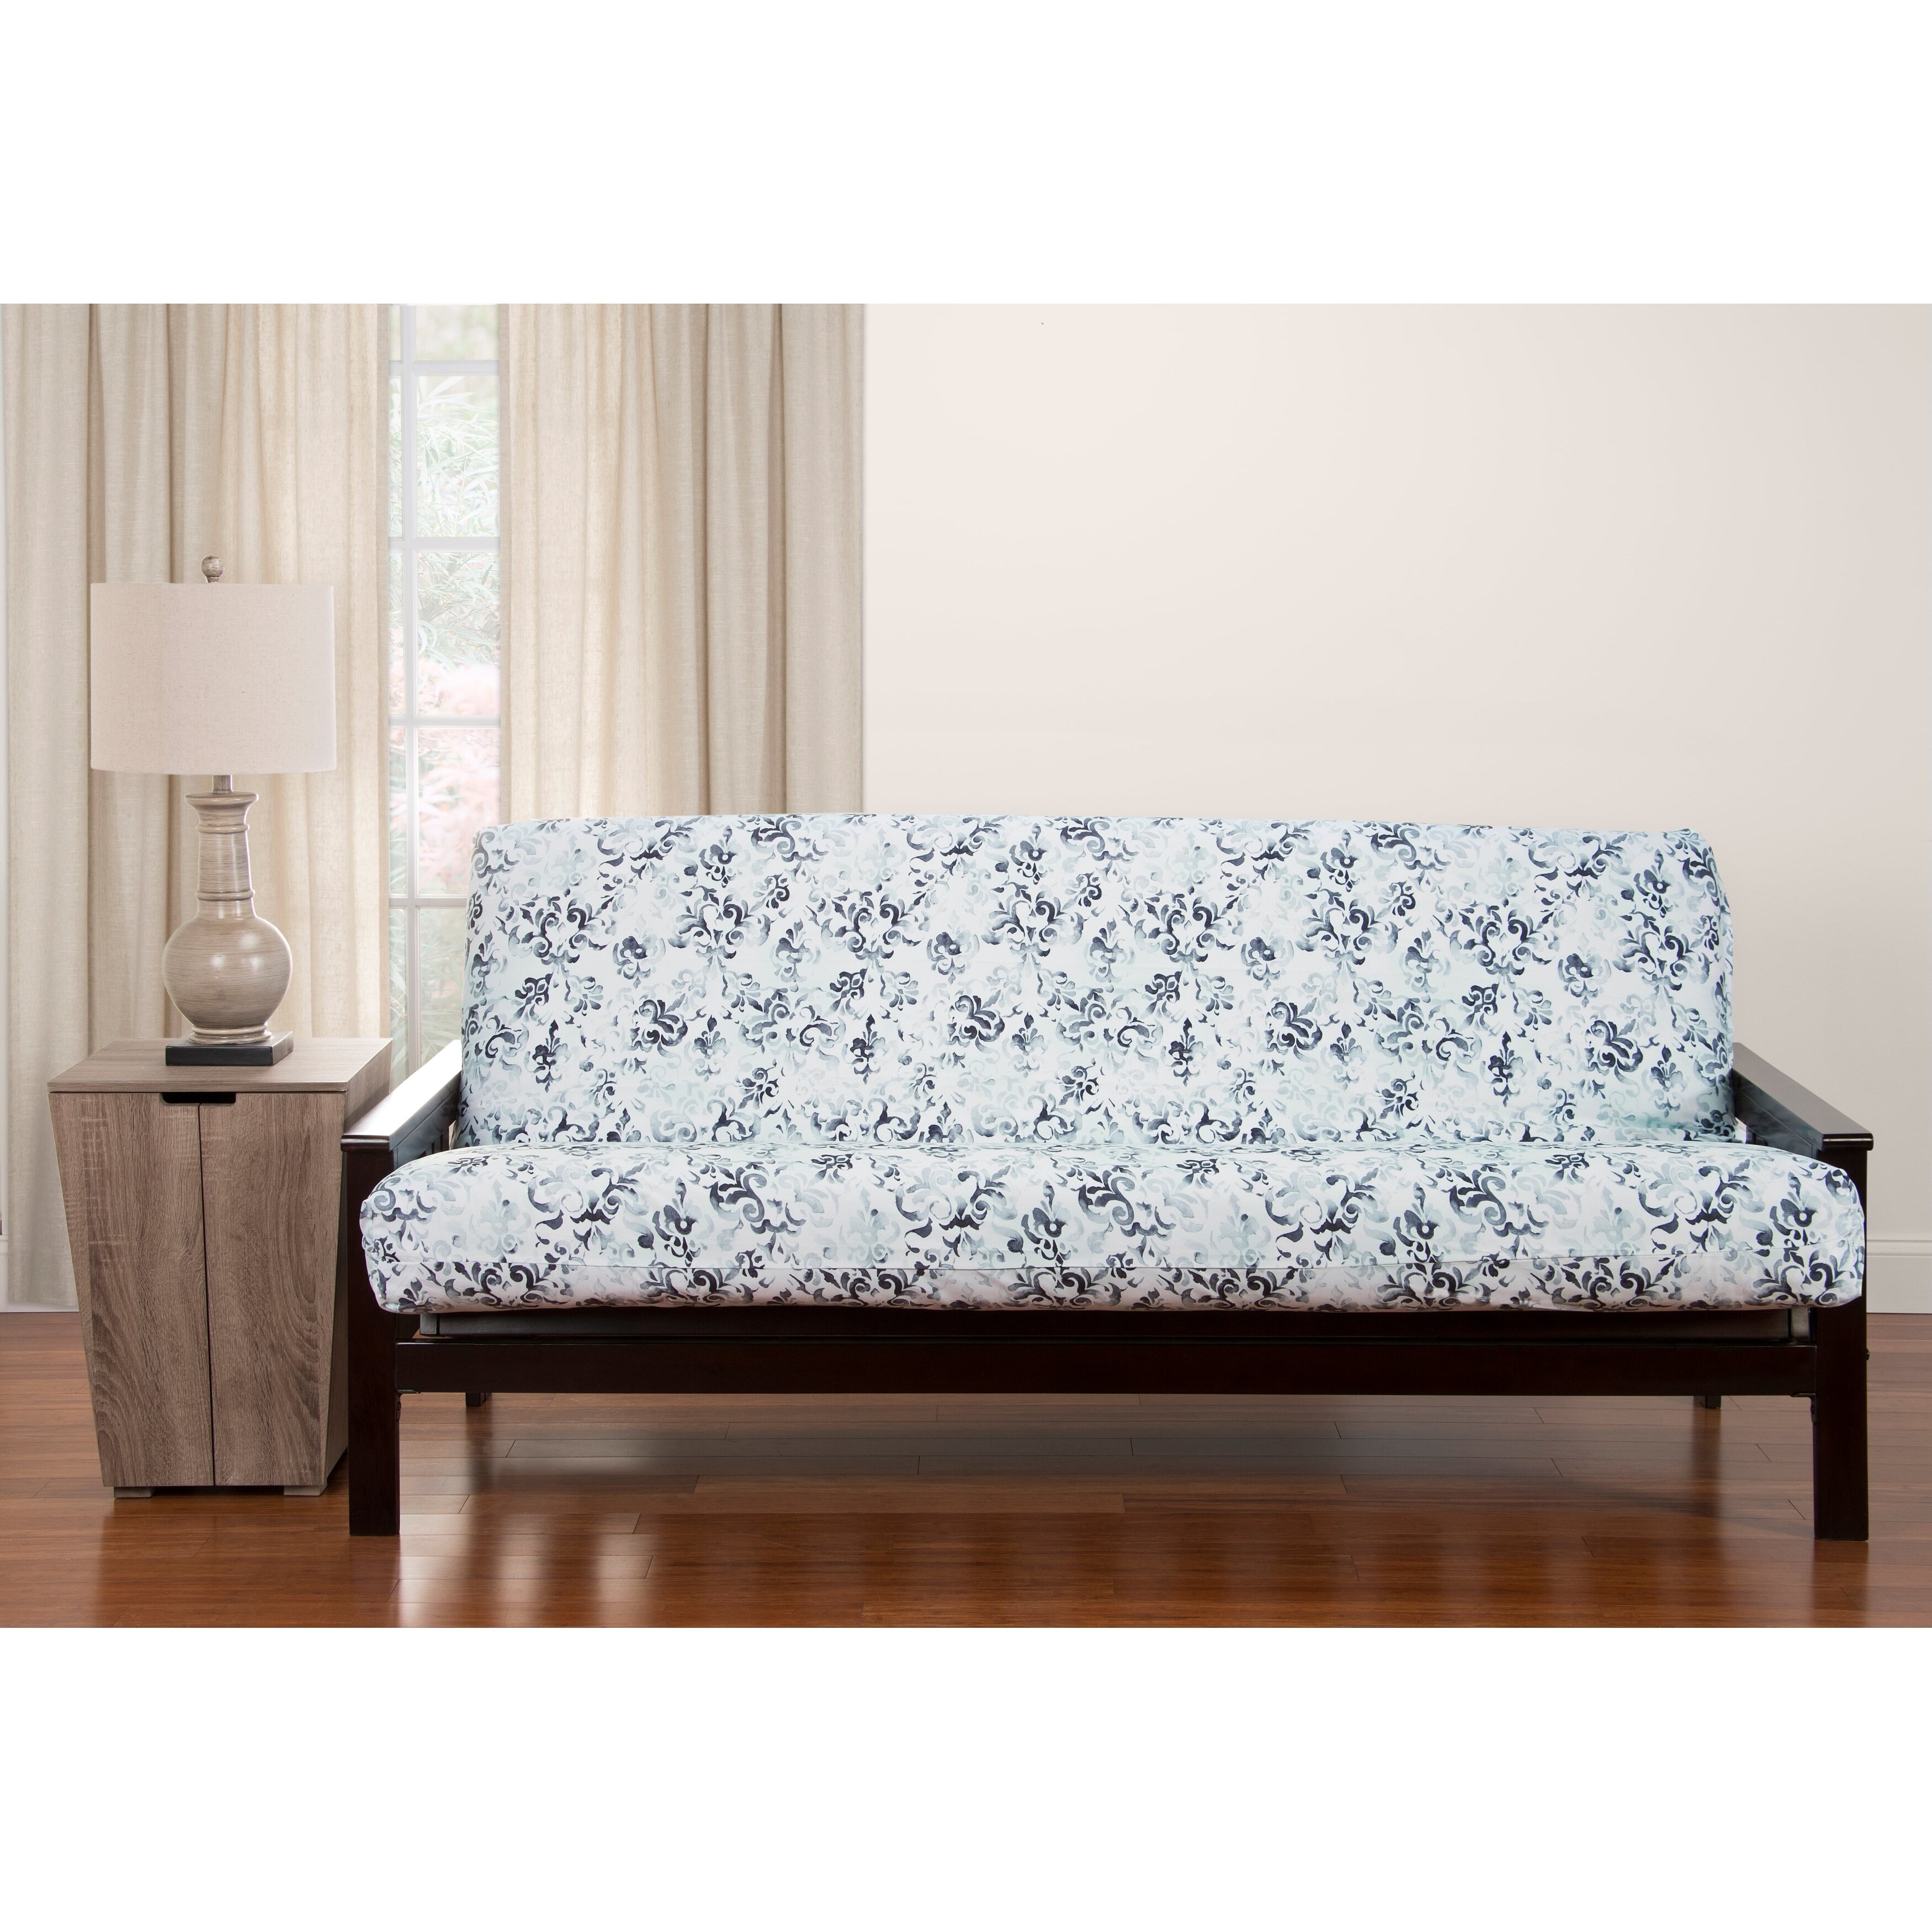 Siscovers Rococo Full Size Futon Cover